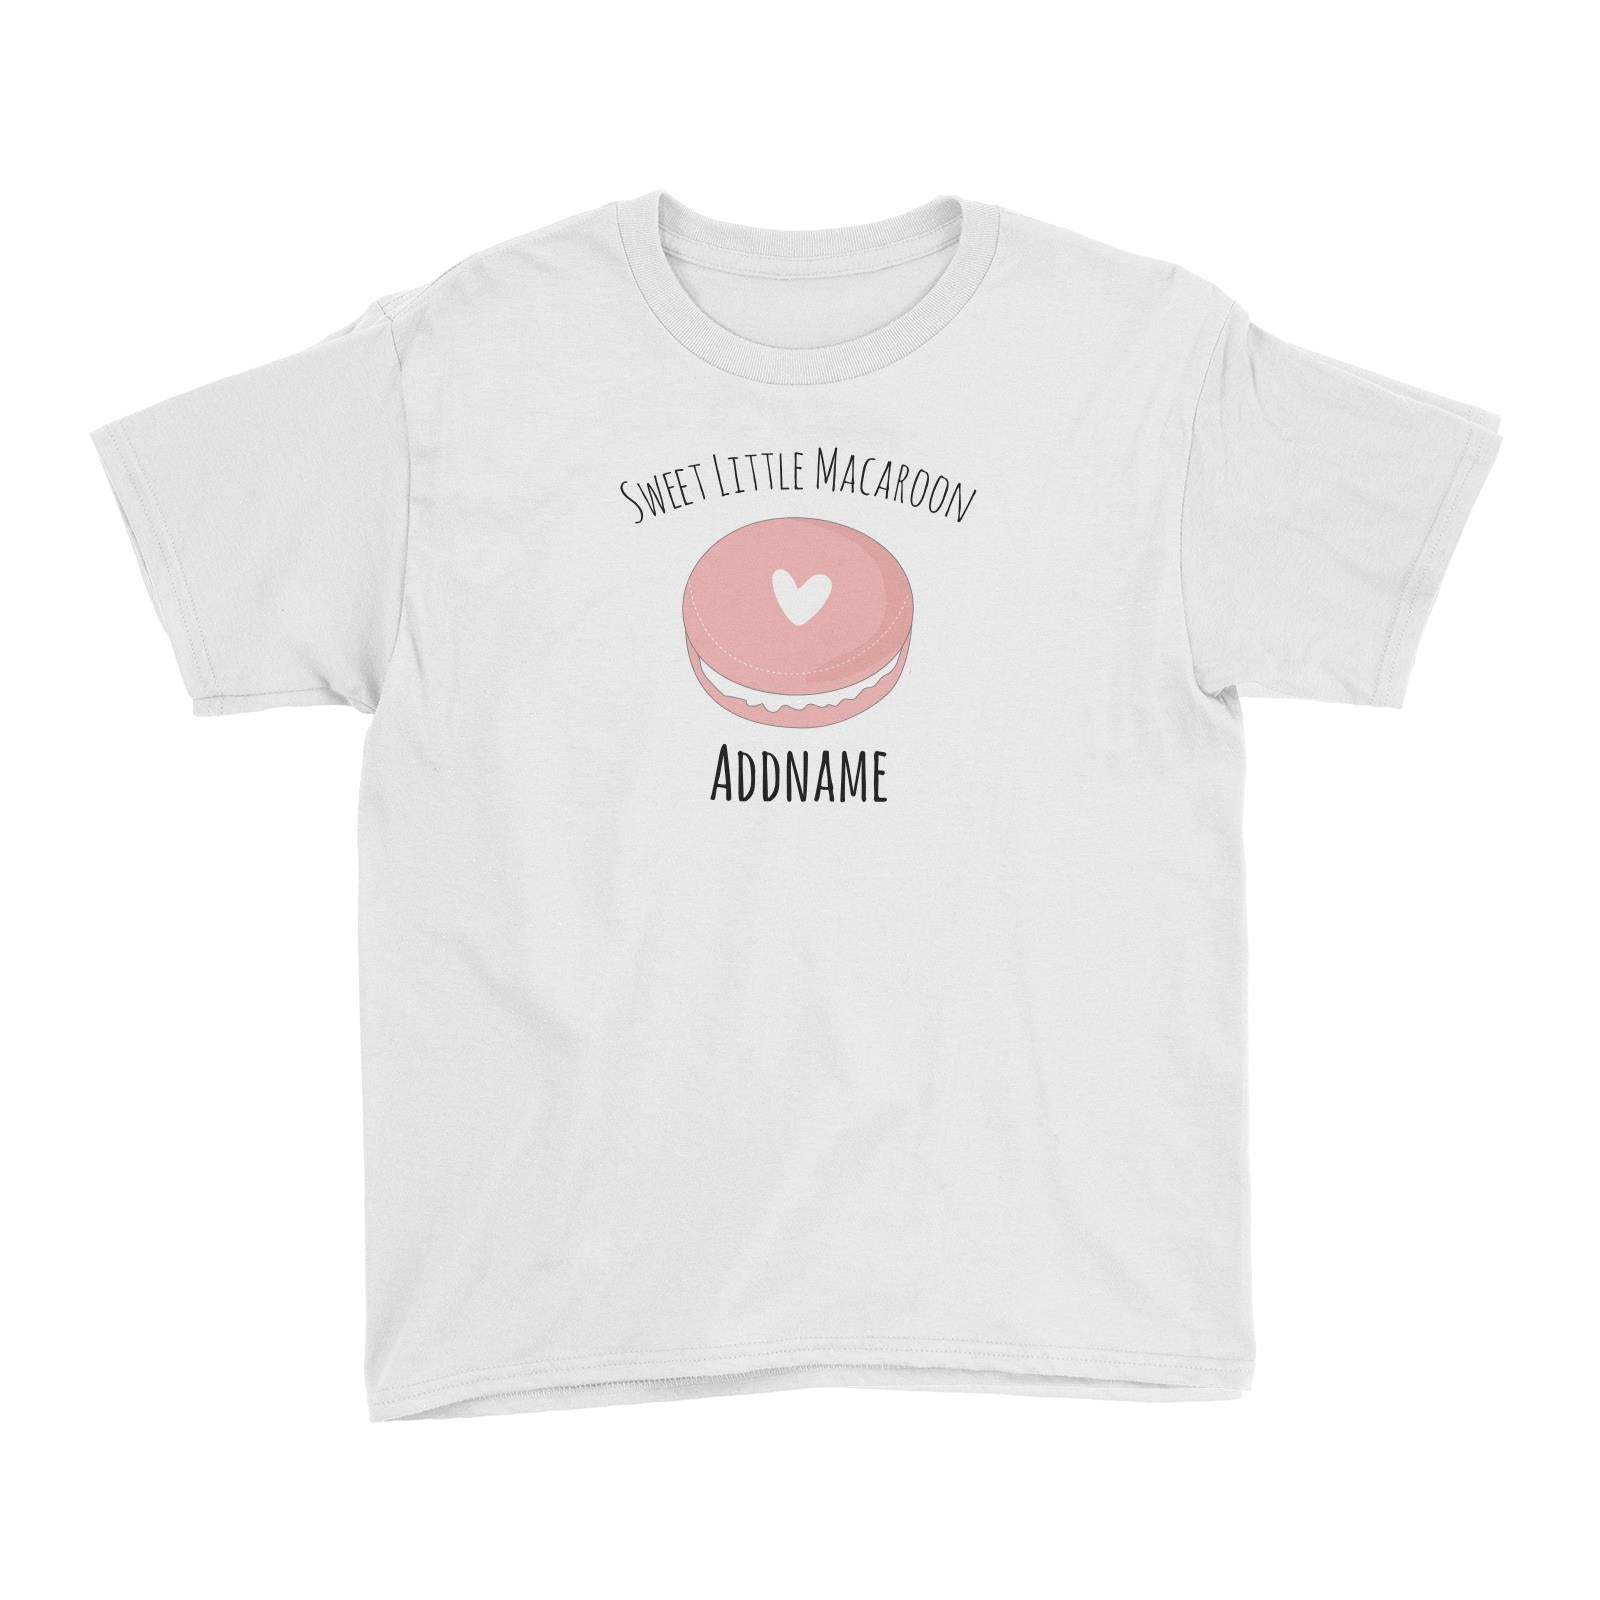 Sweet Animals Sketches Sweet Little Macaroon Addname Kid's T-Shirt